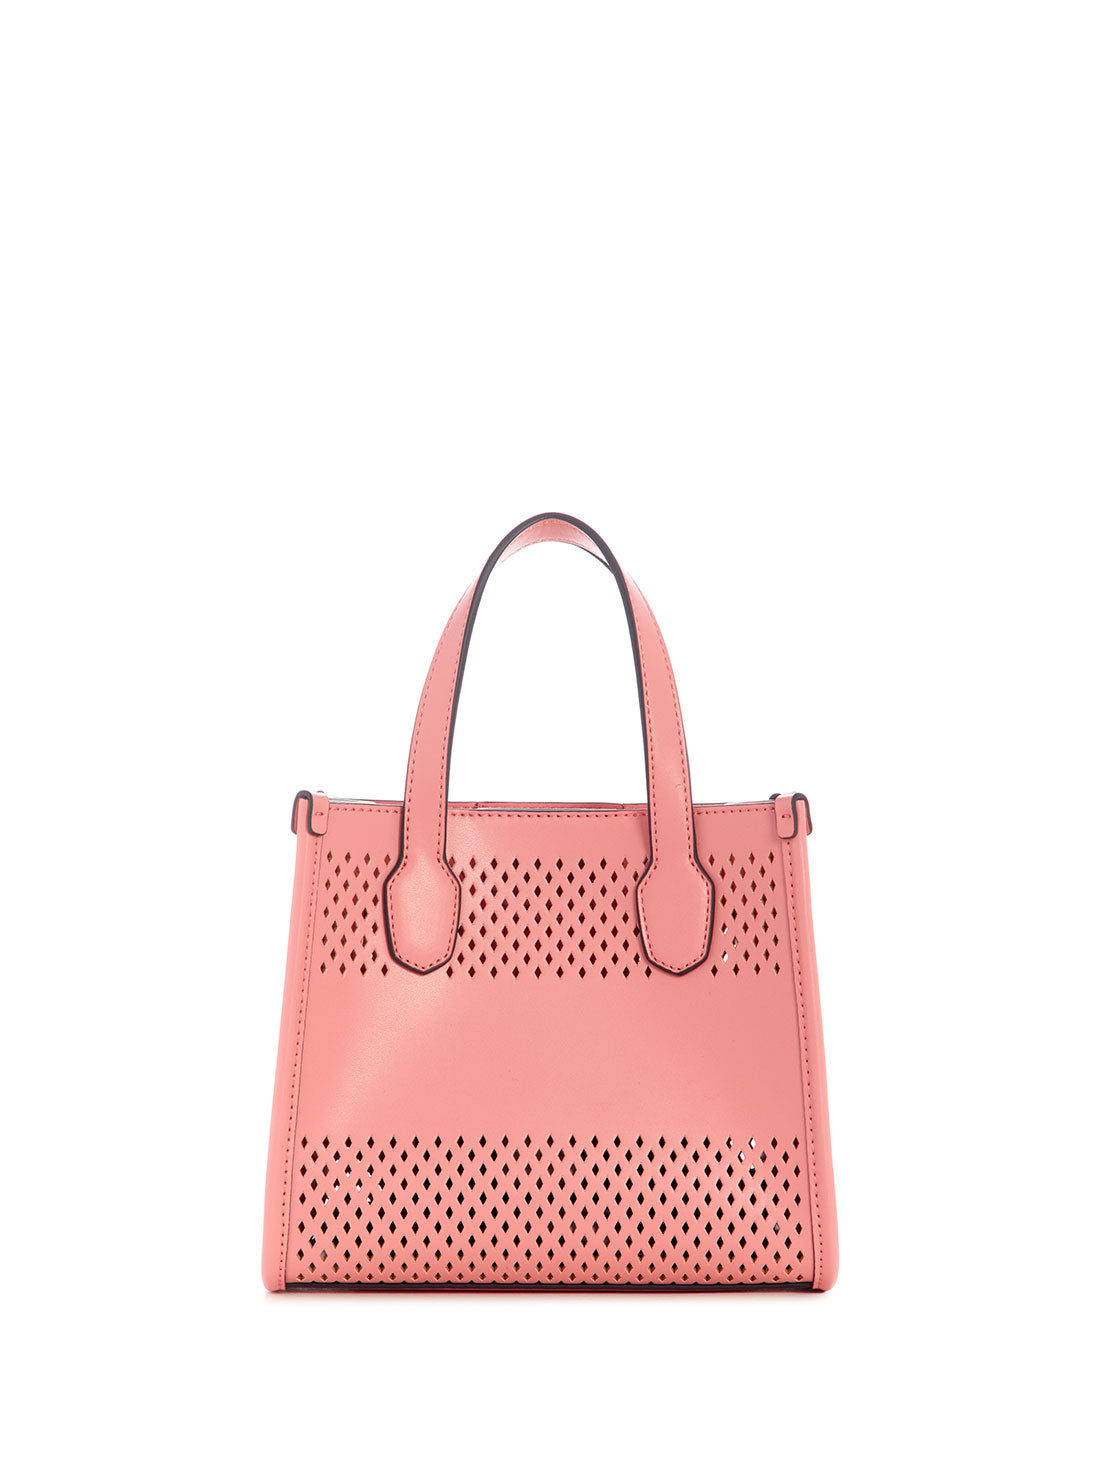 GUESS Women's Pink Katey Perf Mini Tote Bag WH876976 Back View